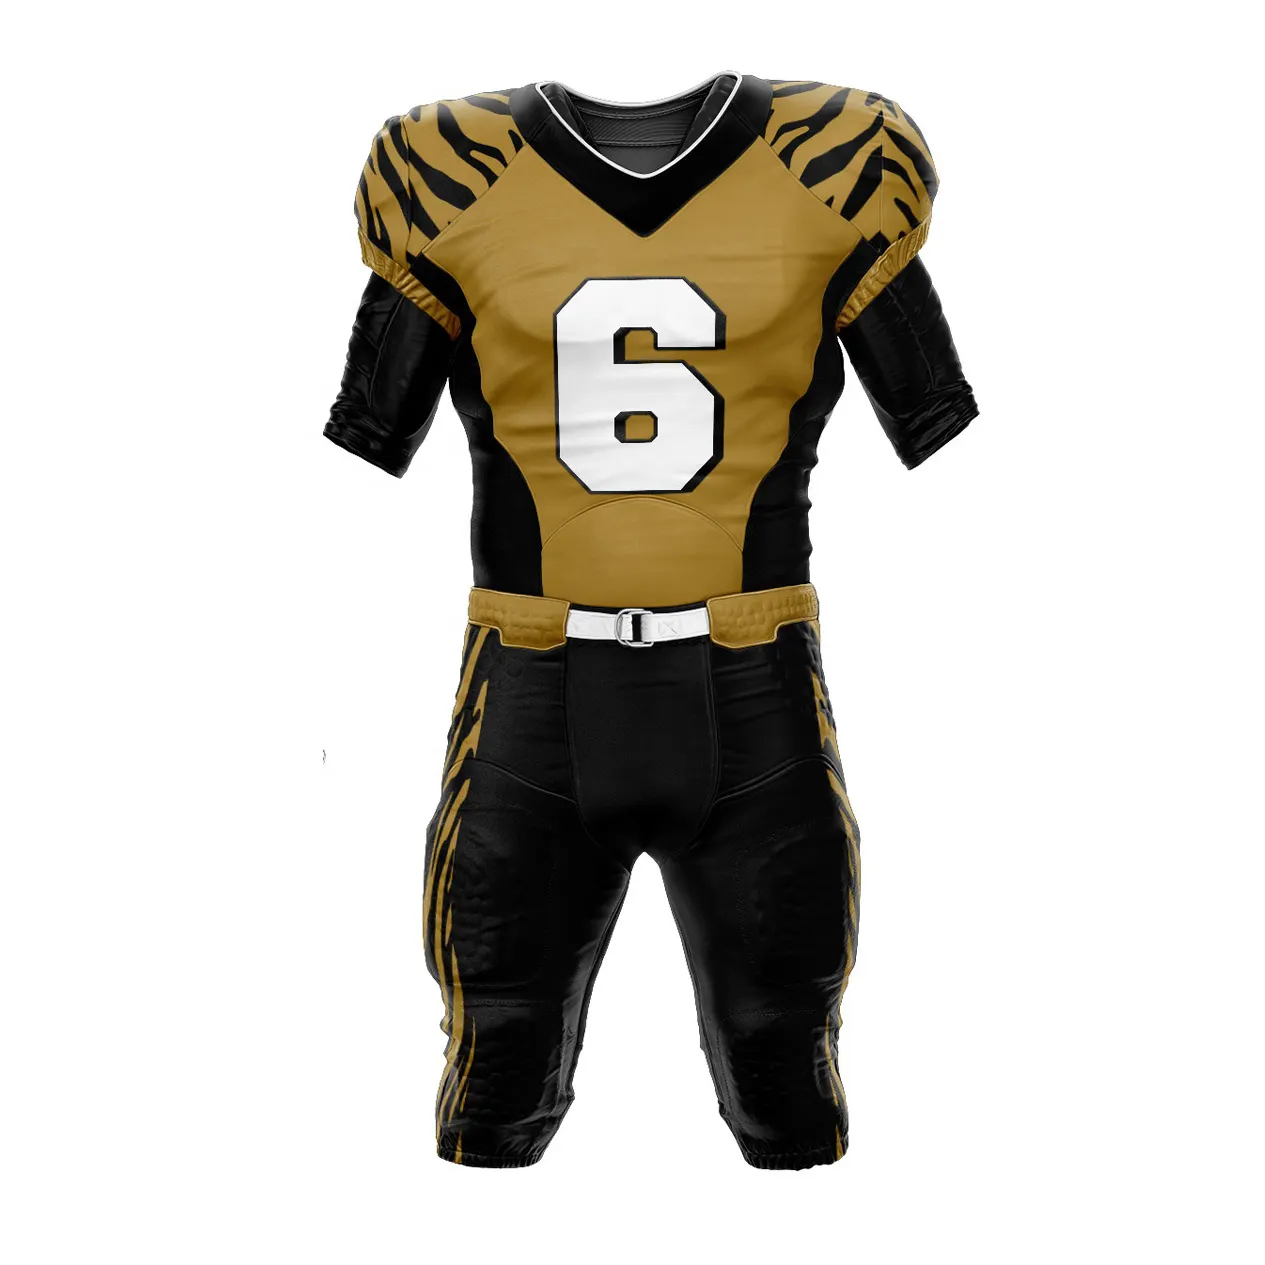 Sublimation Made Youth American Football Team Uniforms Quick Dry American Football Uniform By Naf Engineering Corporation